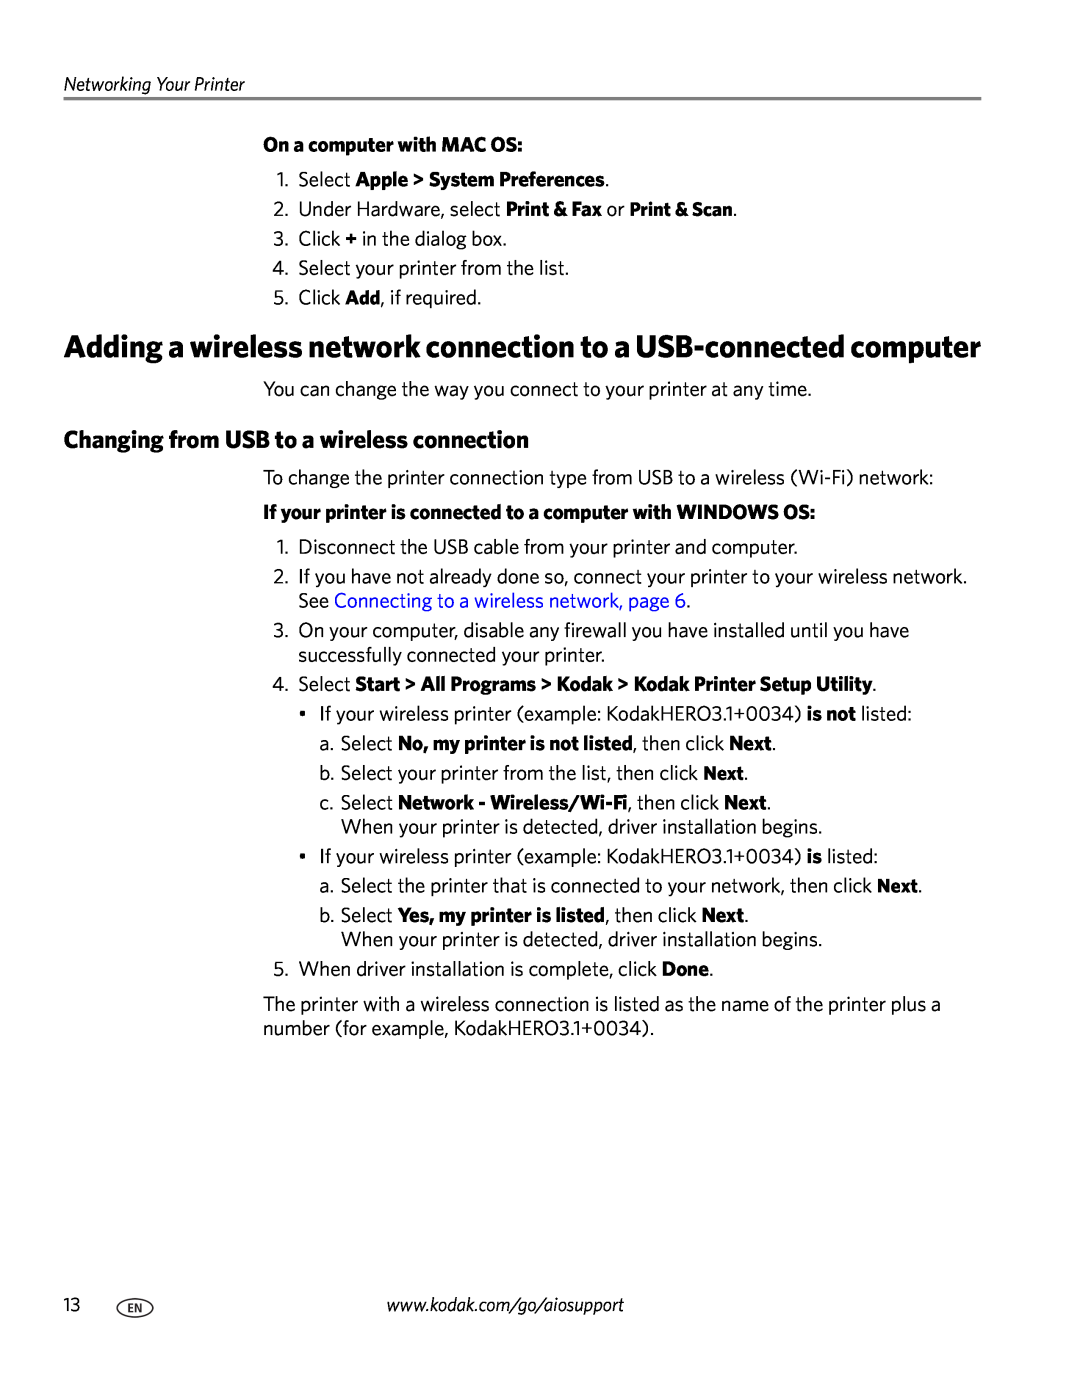 Kodak 3.1 manual Changing from USB to a wireless connection, On a computer with MAC OS 1. Select Apple System Preferences 